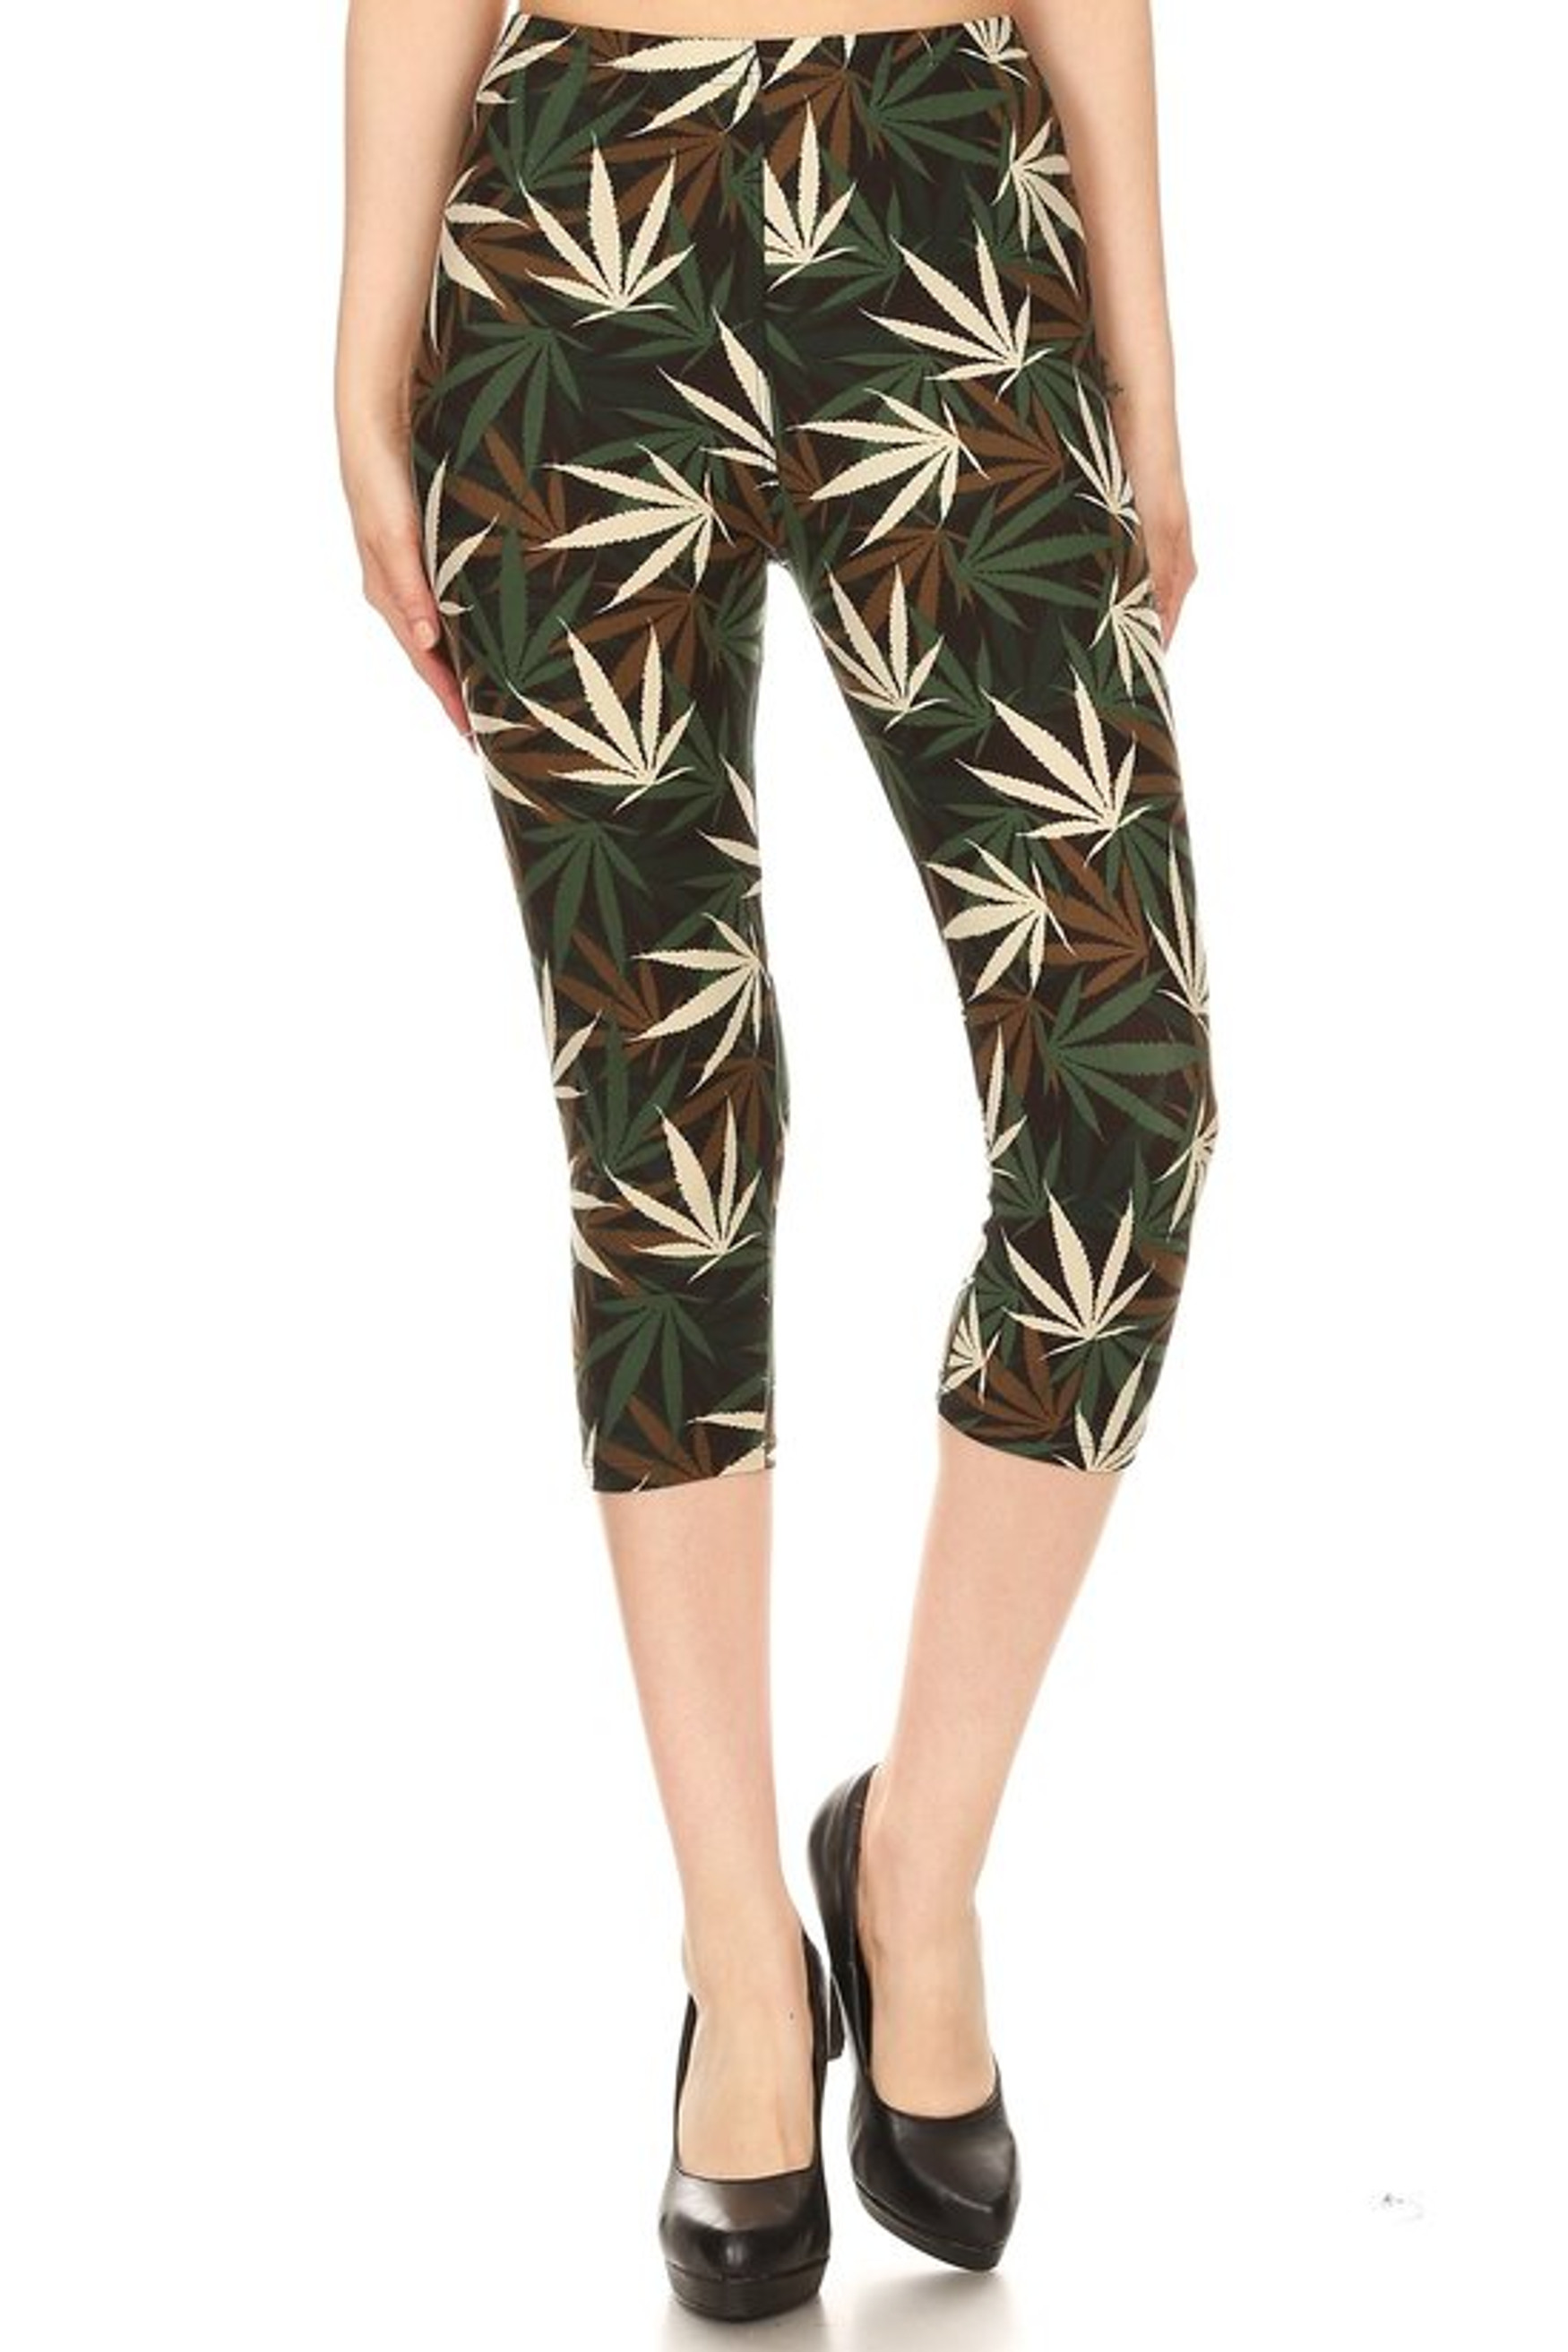 These are our Buttery Soft Earthen Marijuana Capris featuring a camouflage inspired color scheme of olive, ivory, and brown toned pot leaf print contrasting a black background.